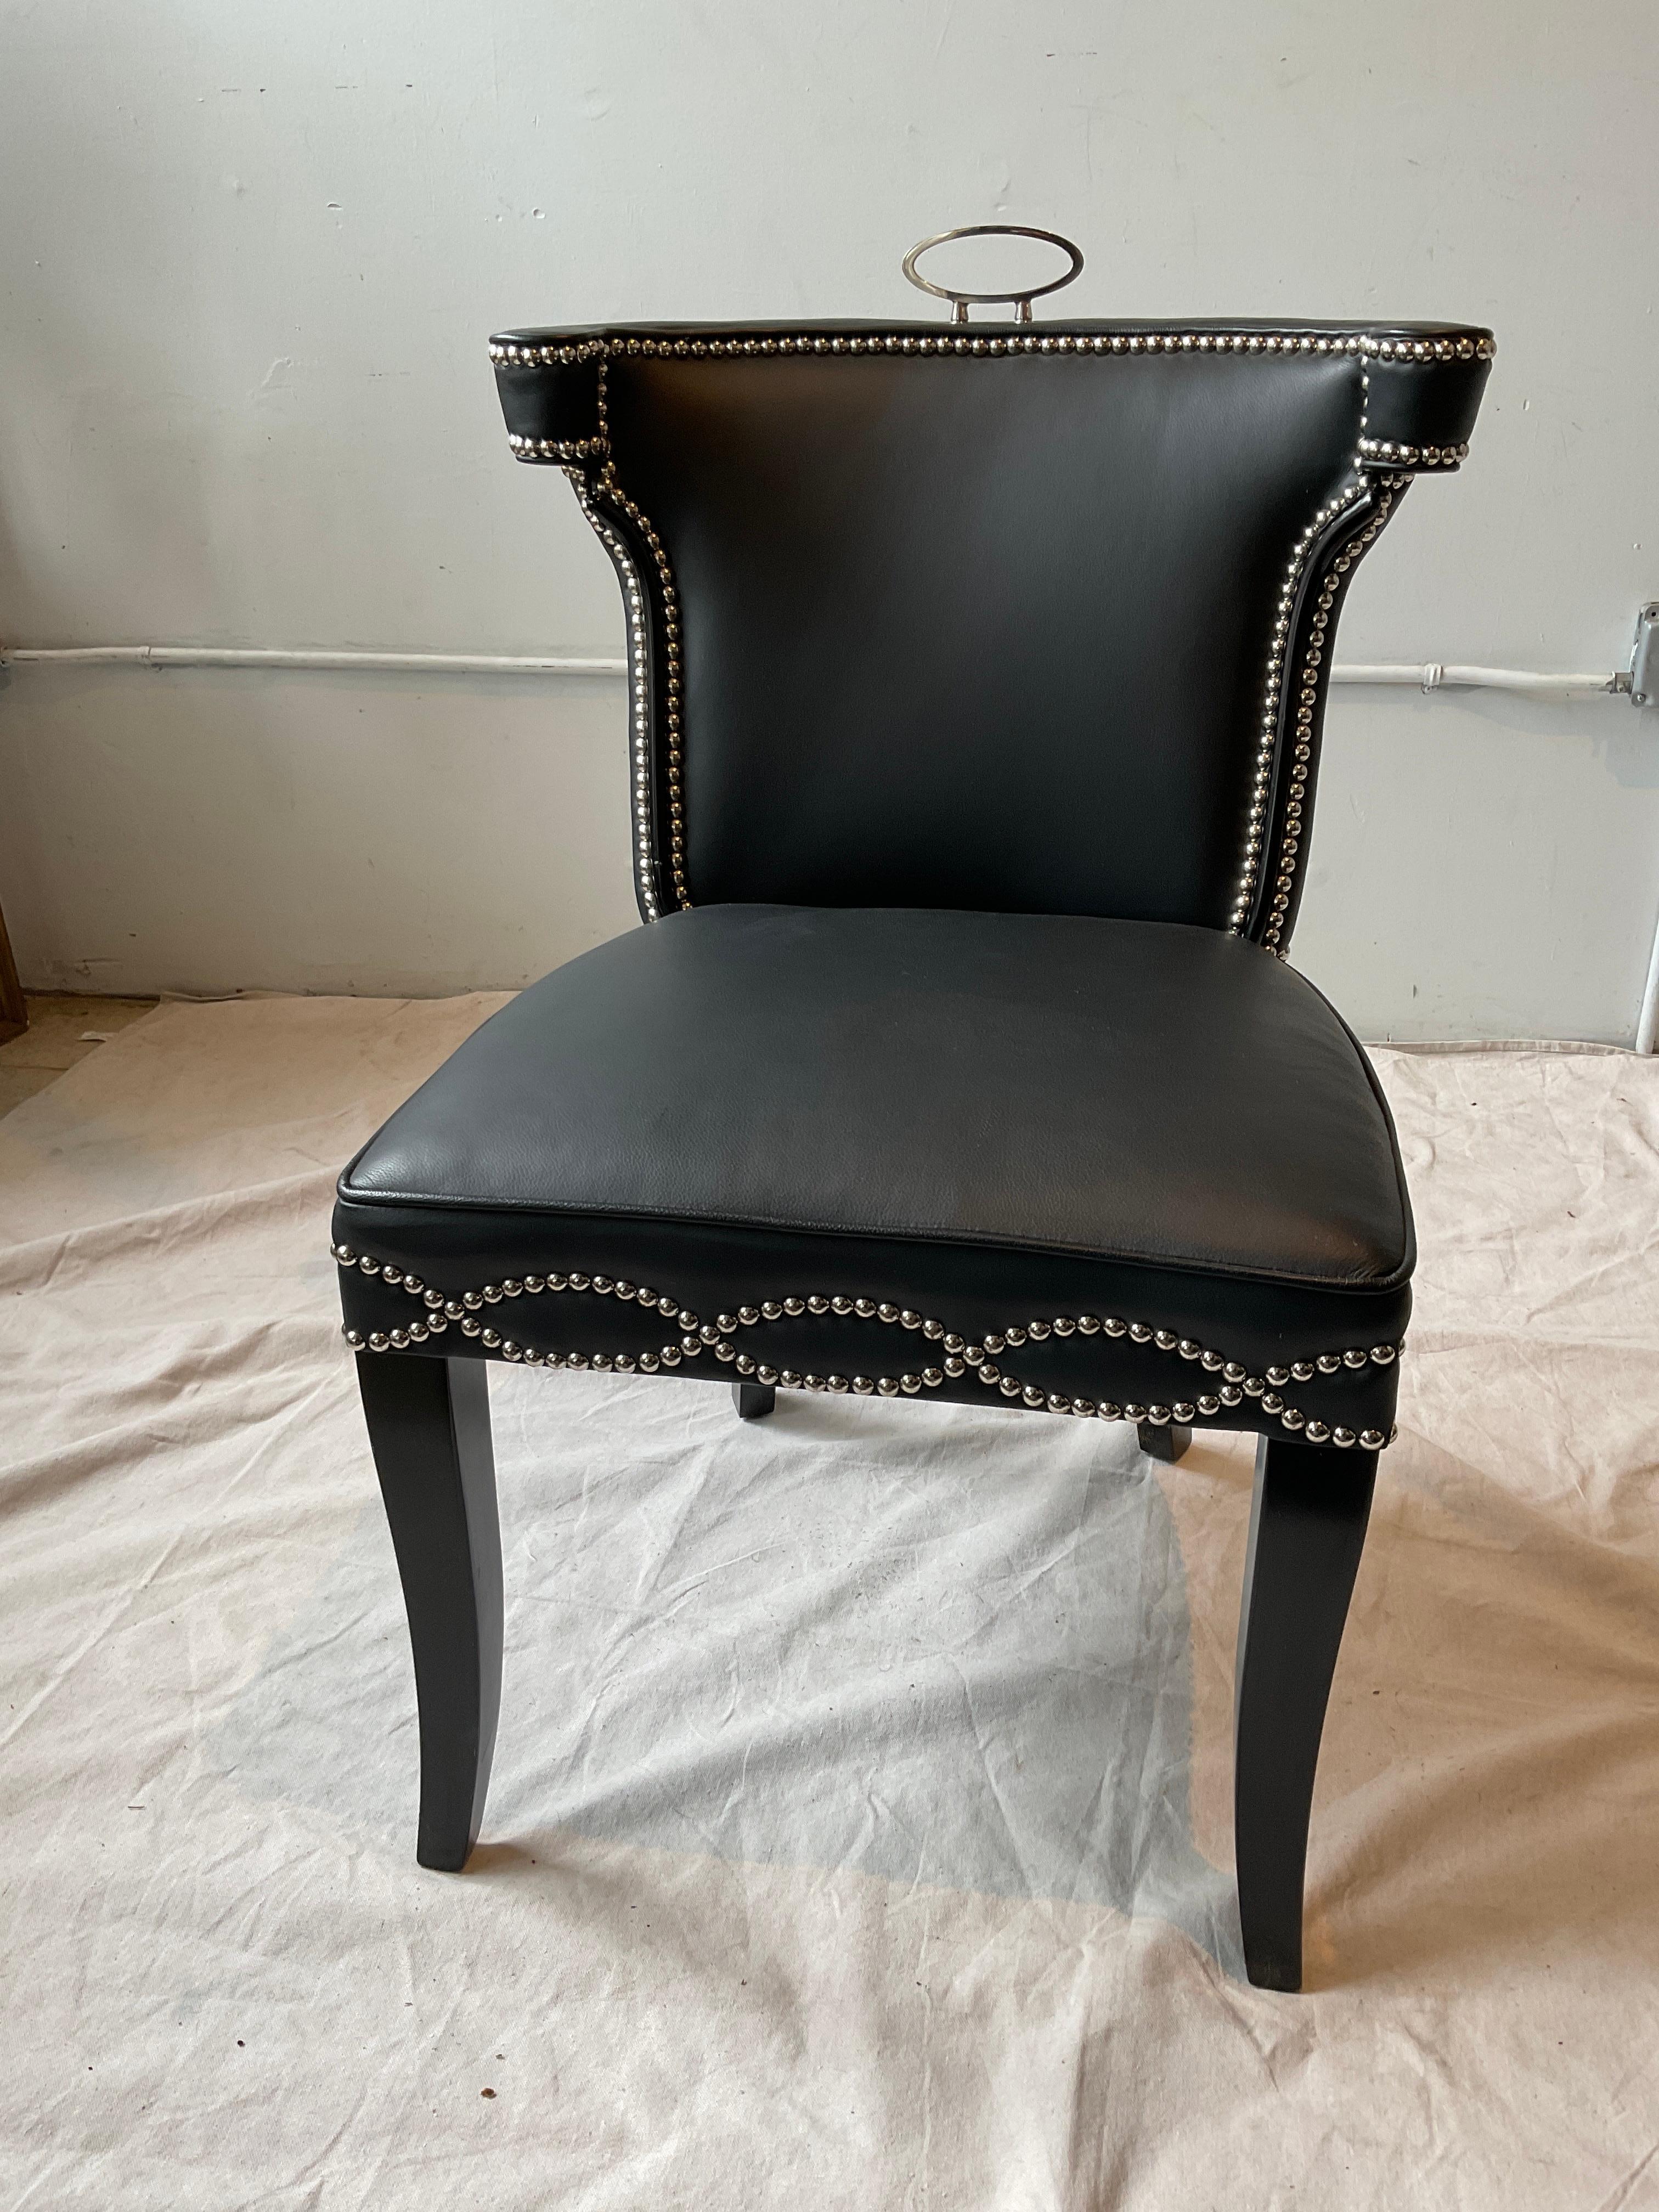 Pair Of Global Views Casino Black Leather Chairs In Good Condition For Sale In Tarrytown, NY